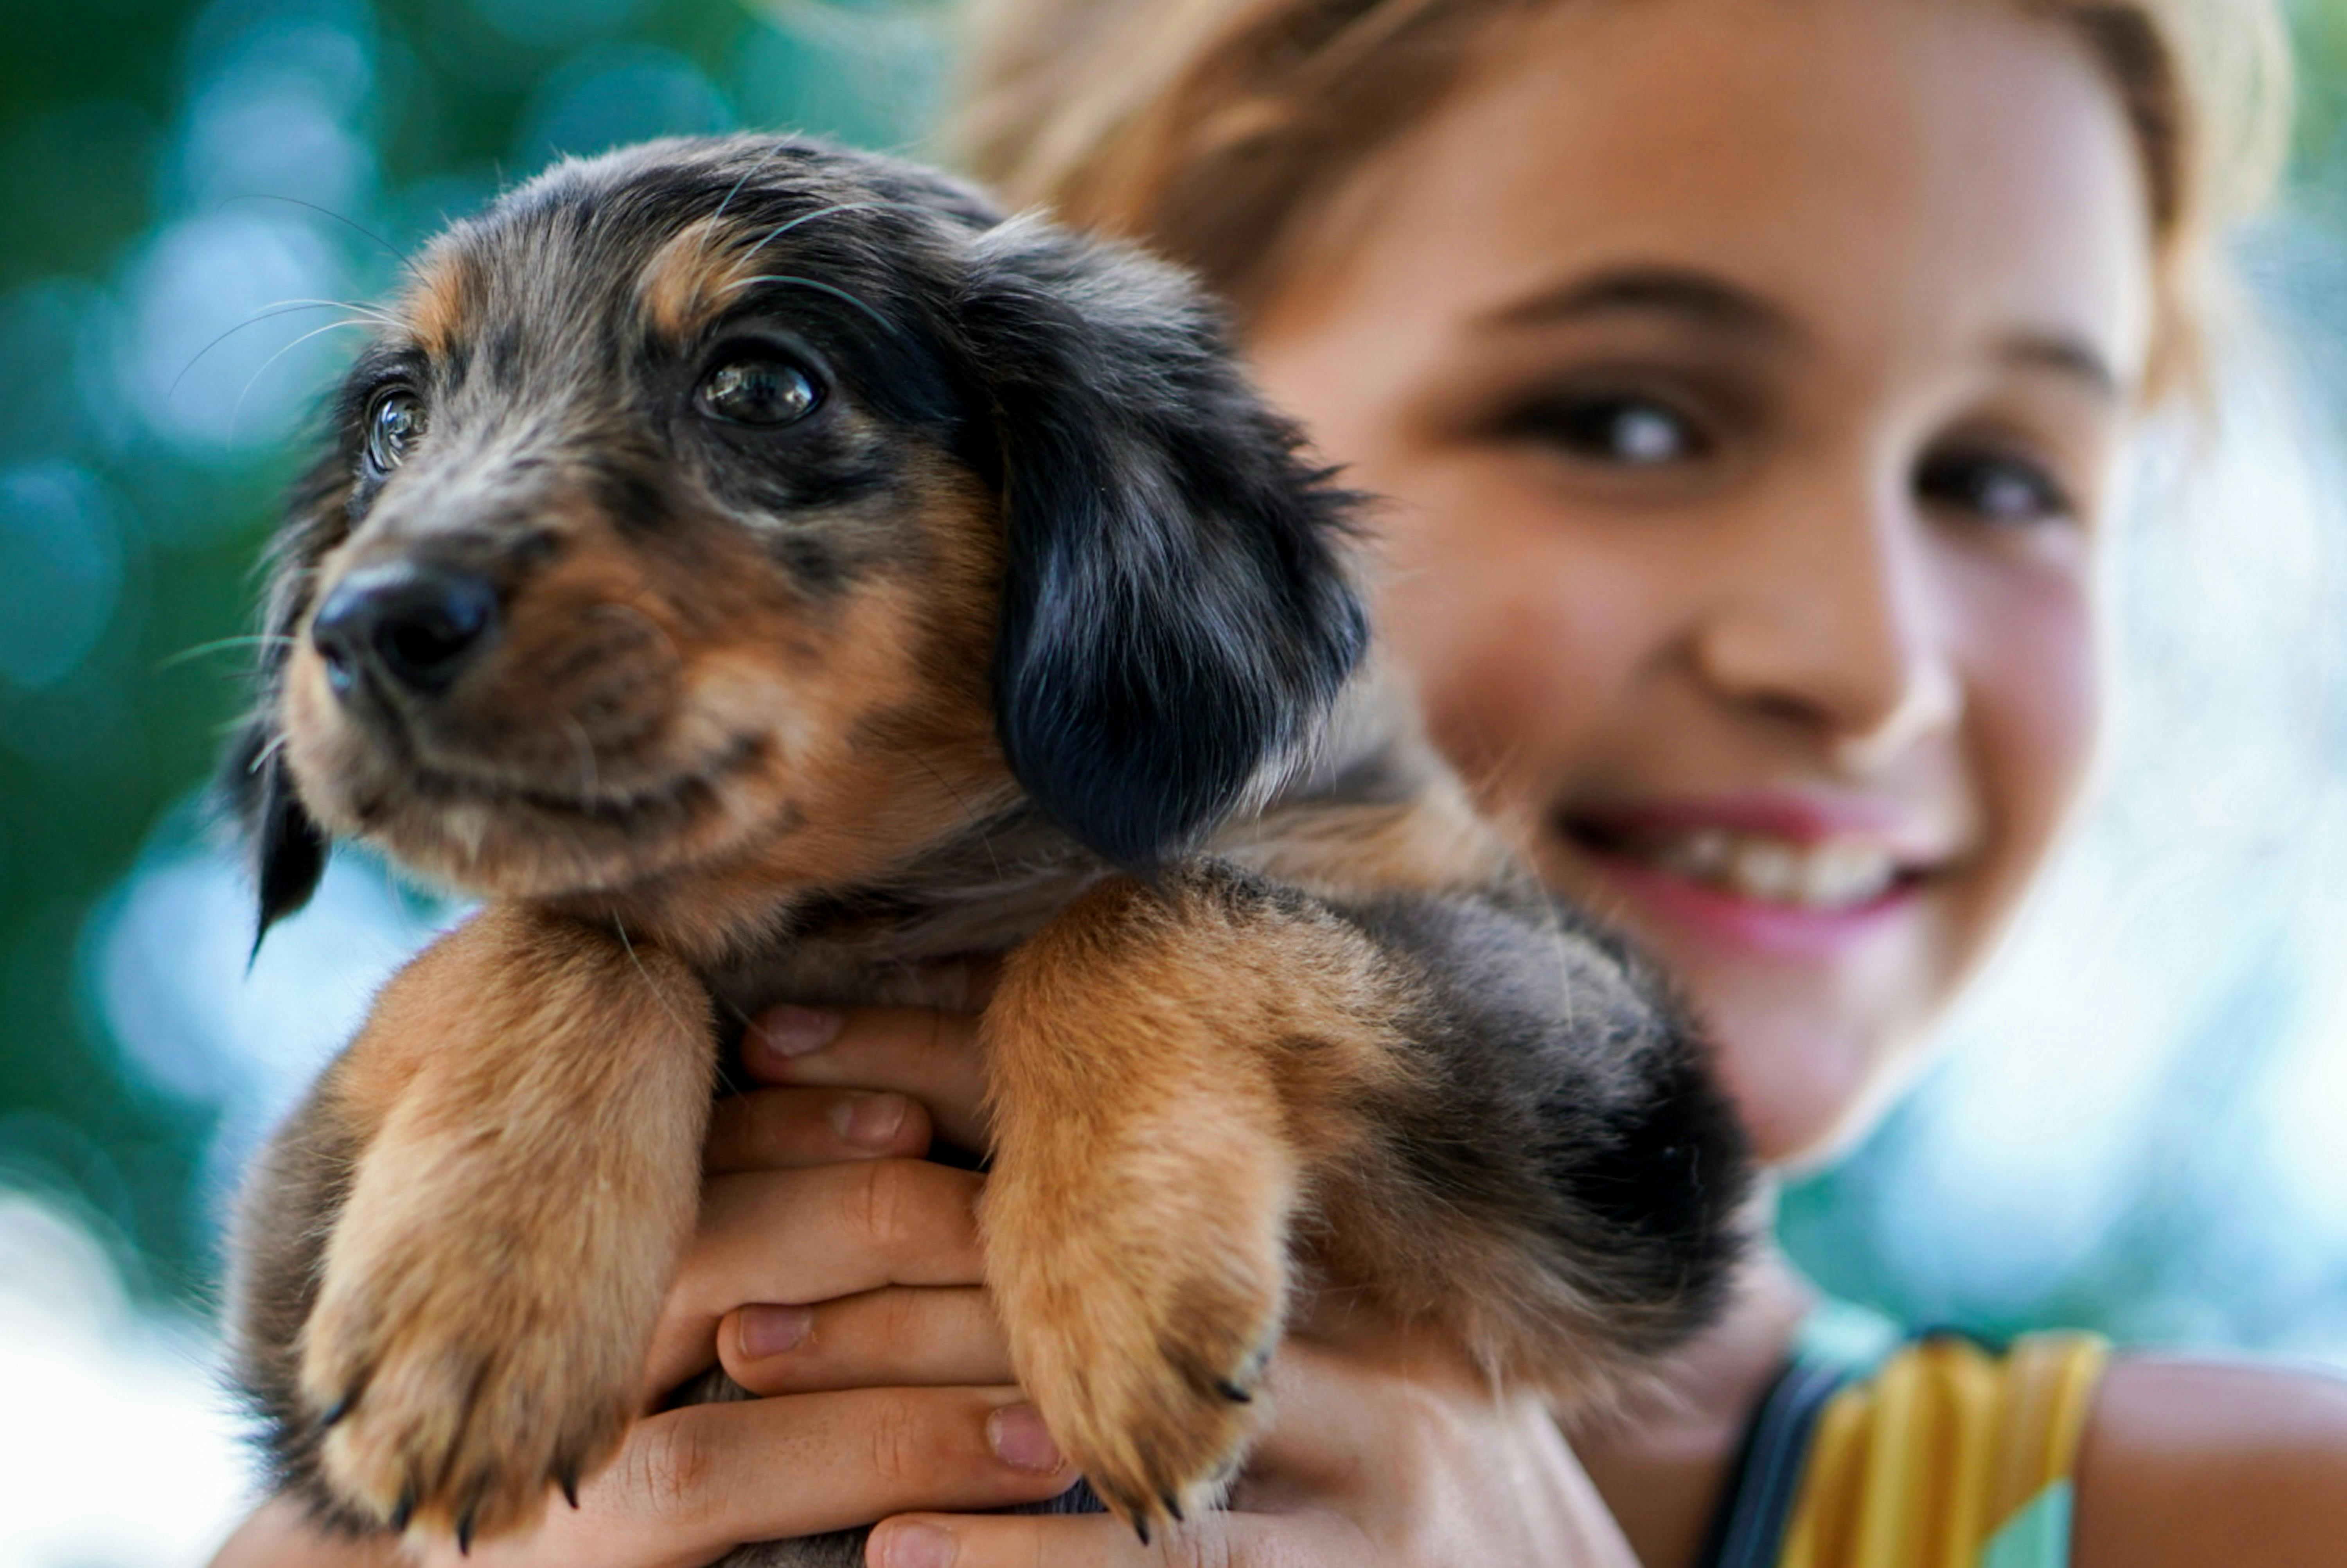 Girl smiling while holding a small dog puppy.